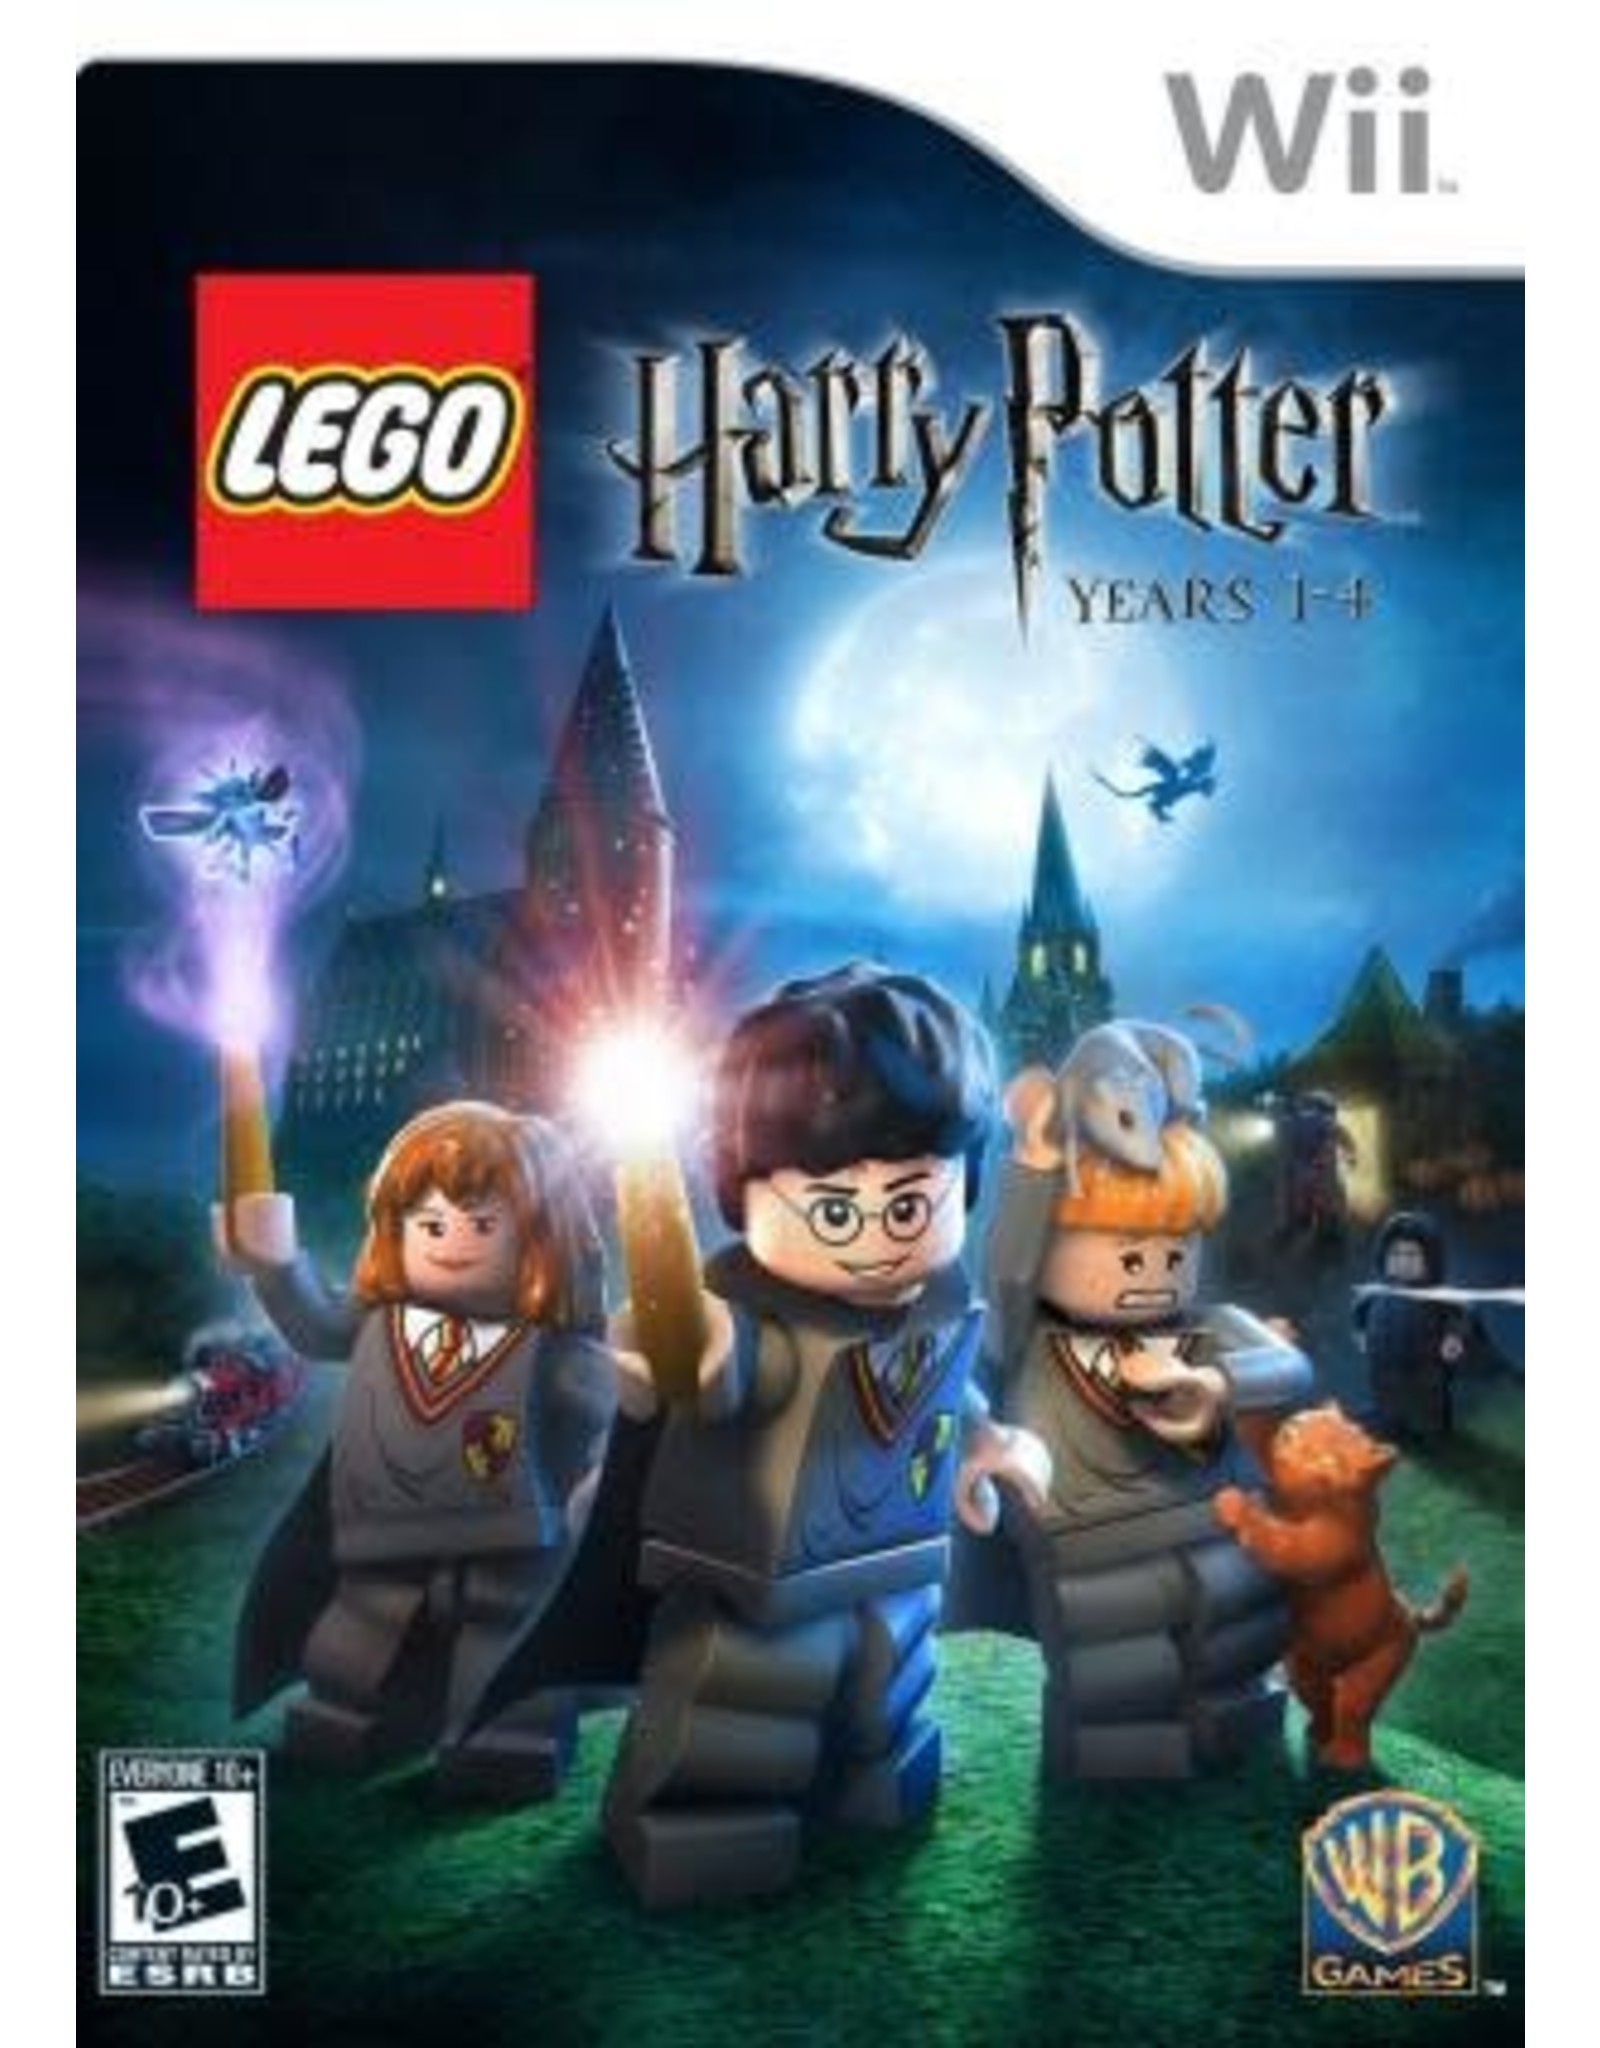 Wii LEGO Harry Potter: Years 1-4 (Used)